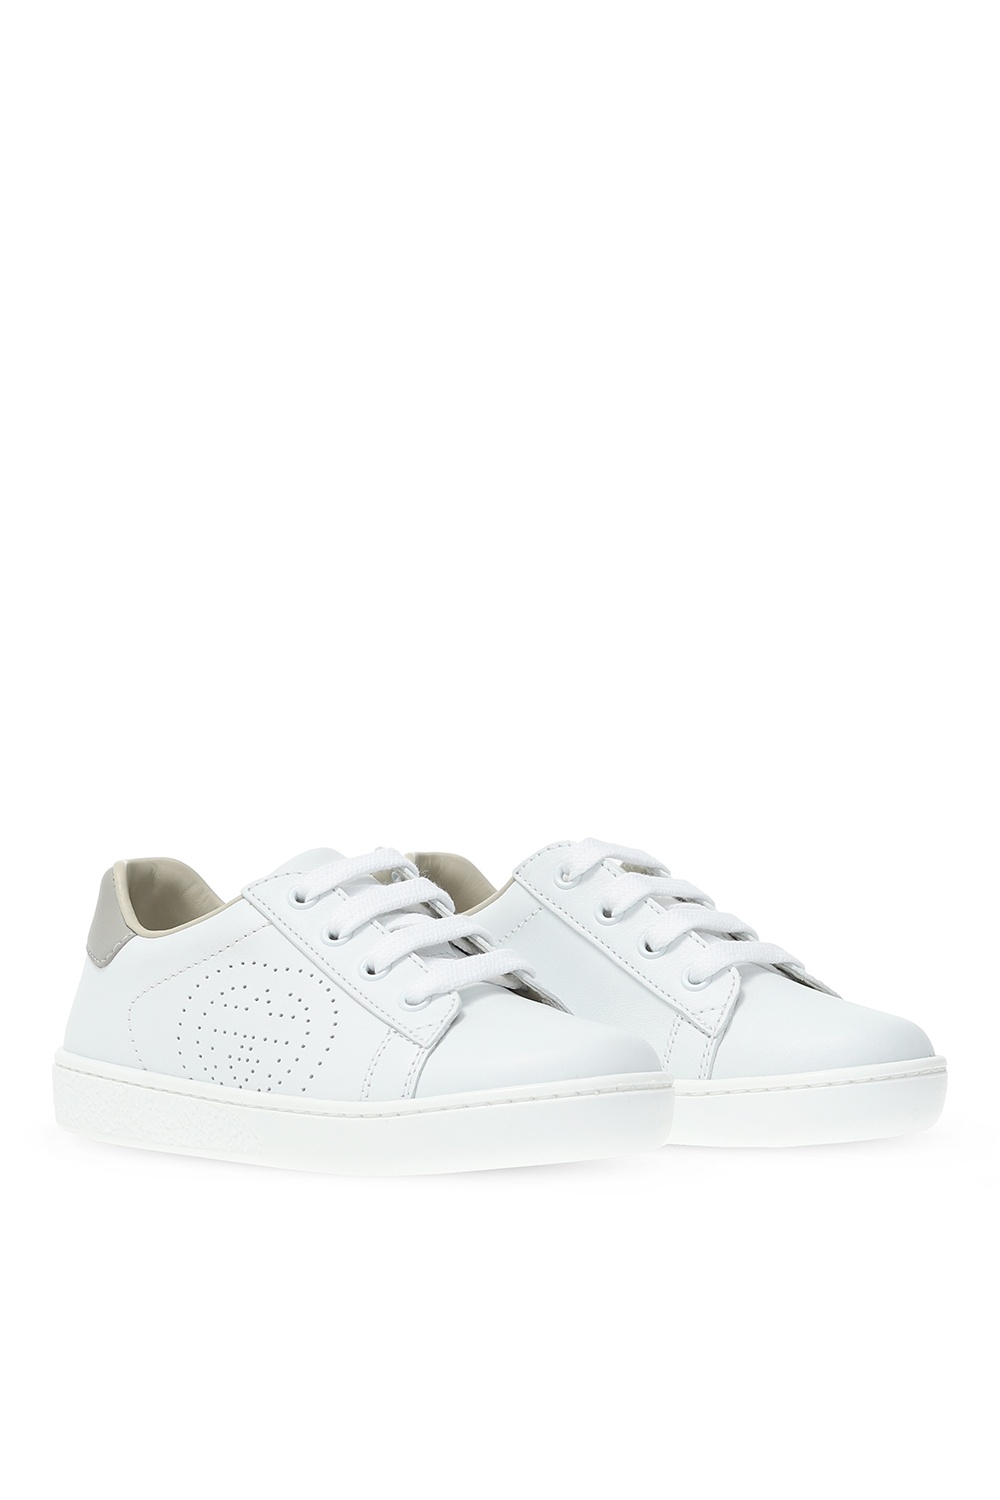 Gucci Kids 'Ace' sneakers